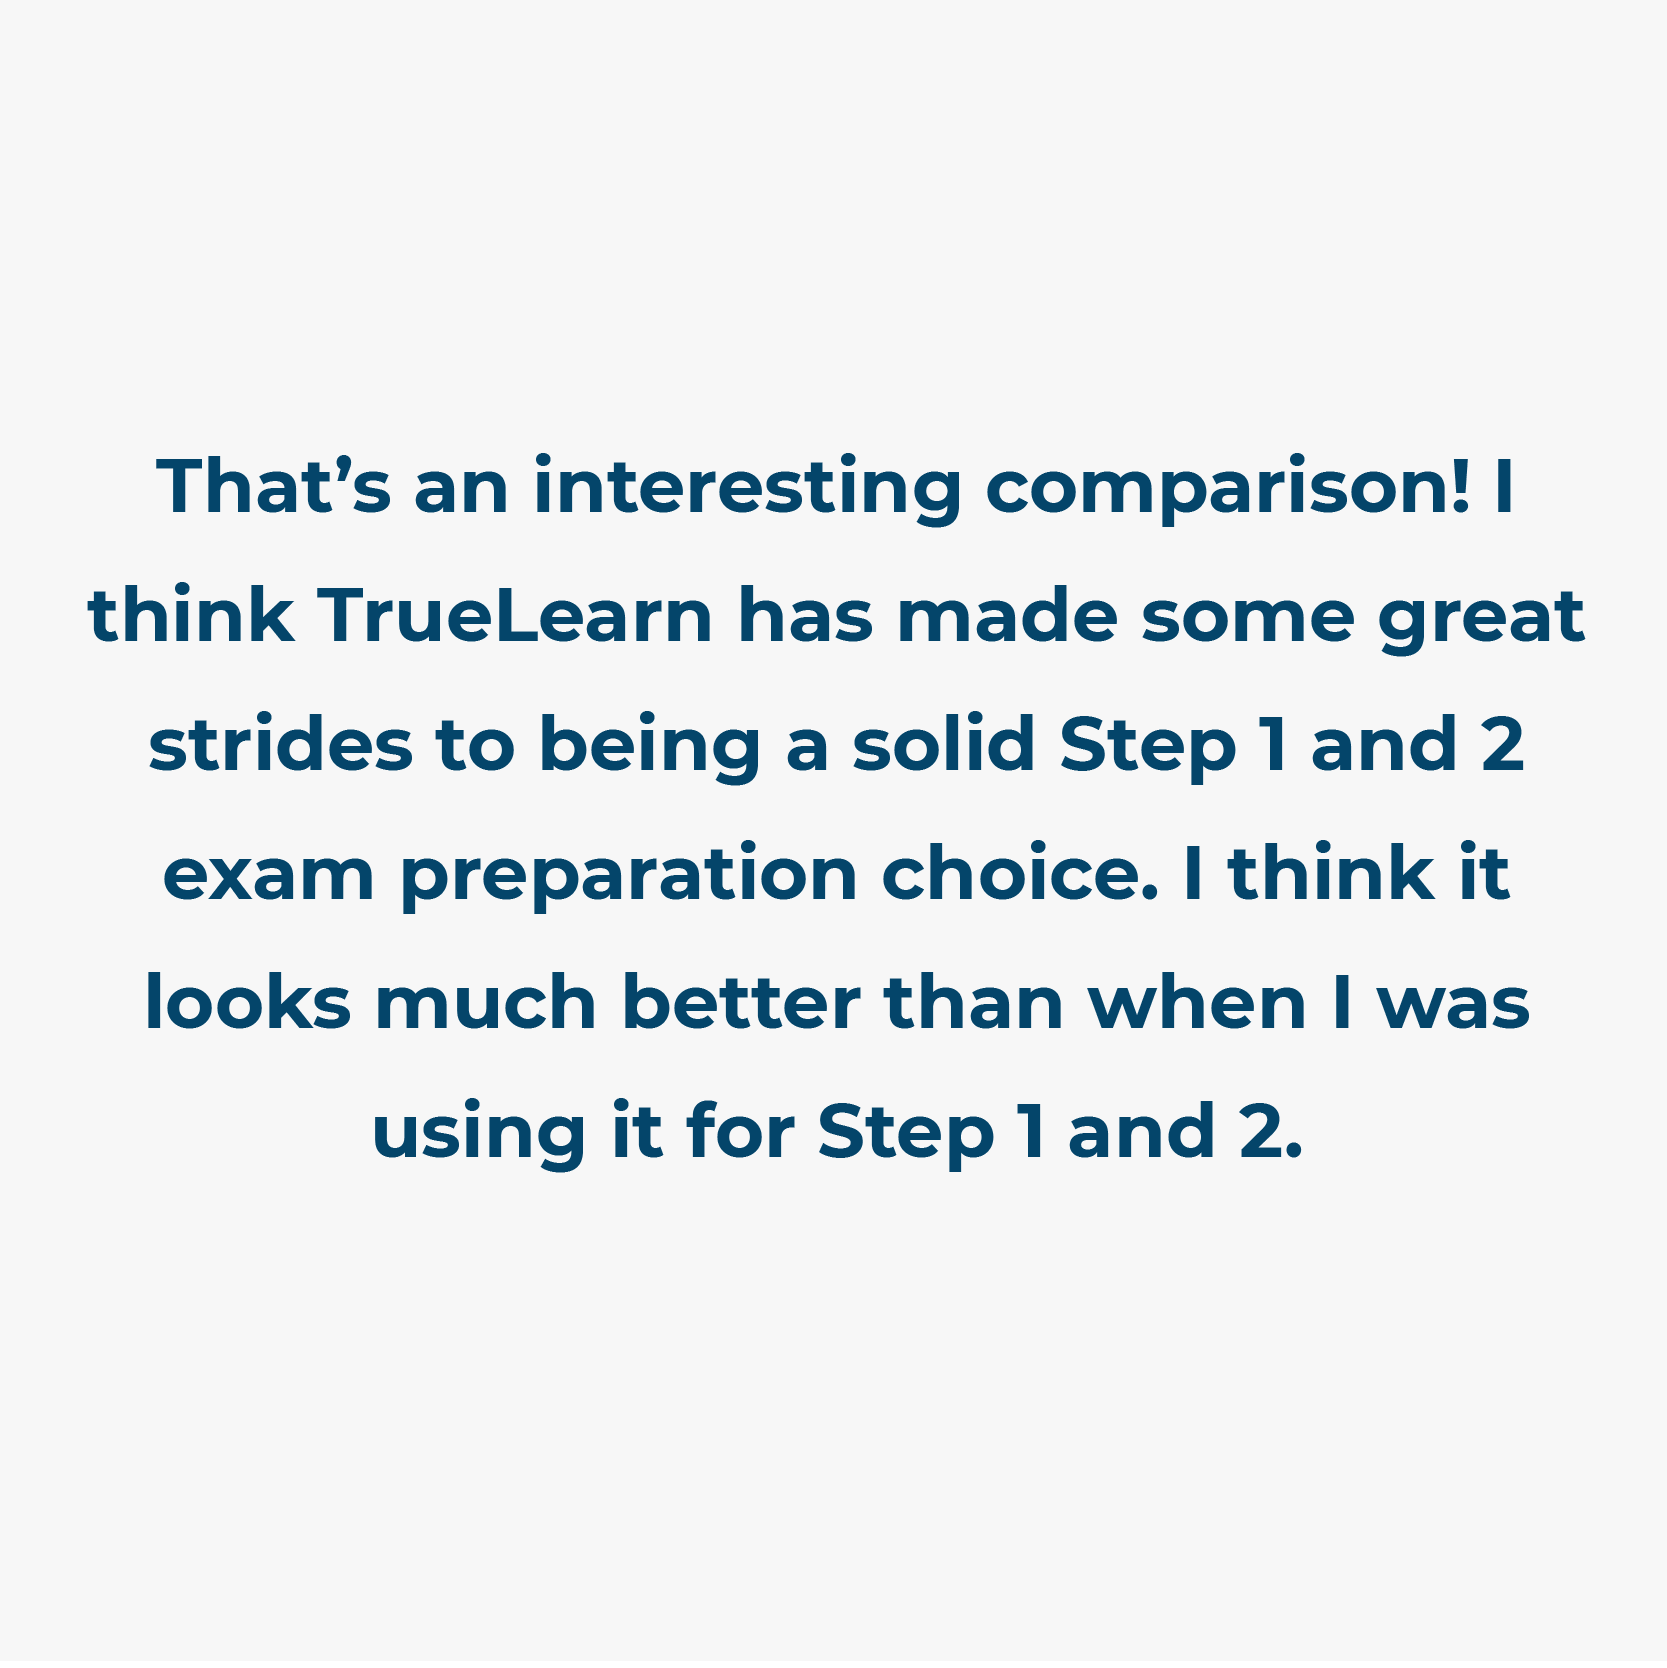 A testimonial responding to the comparison and congratulating TrueLearn